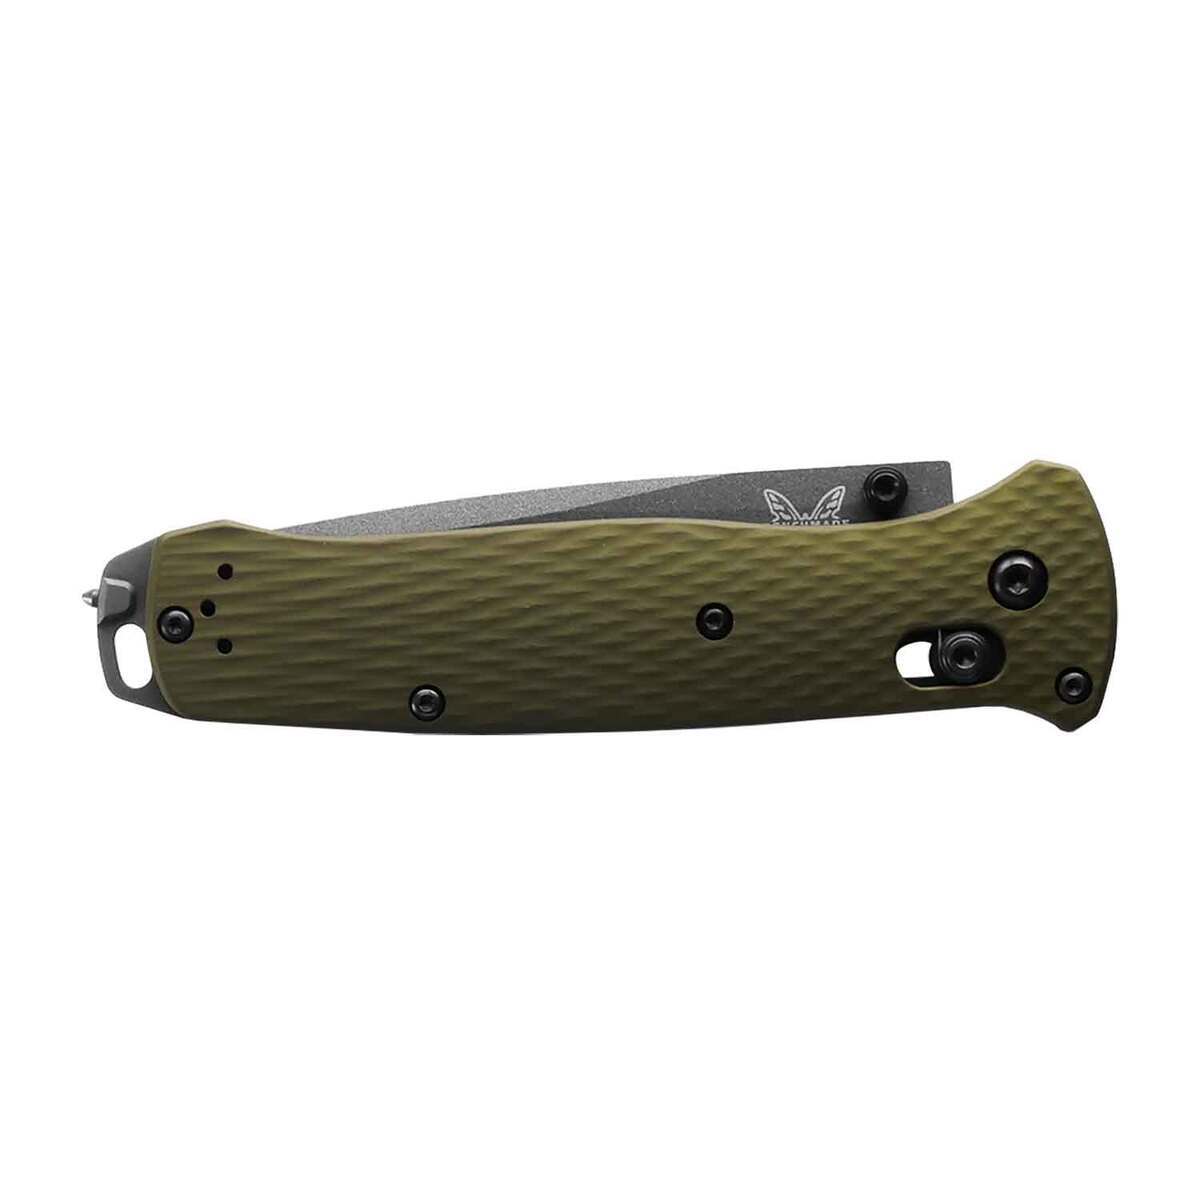 Benchmade Bailout 338 Inch Folding Knife Sportsmans Warehouse